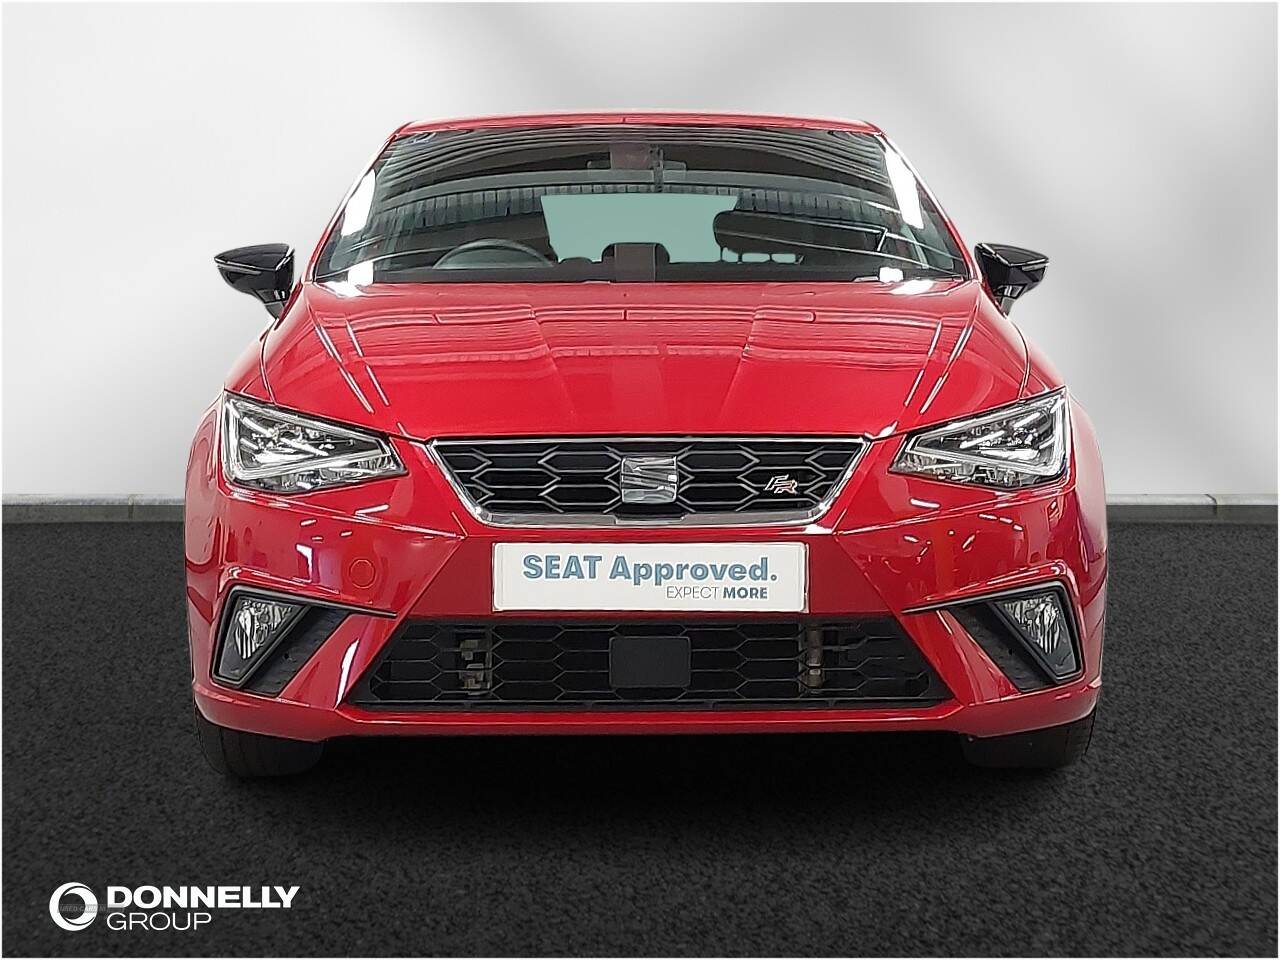 Used 2020 Seat Ibiza 1.0 TSI 95 FR Sport [EZ] 5dr For Sale